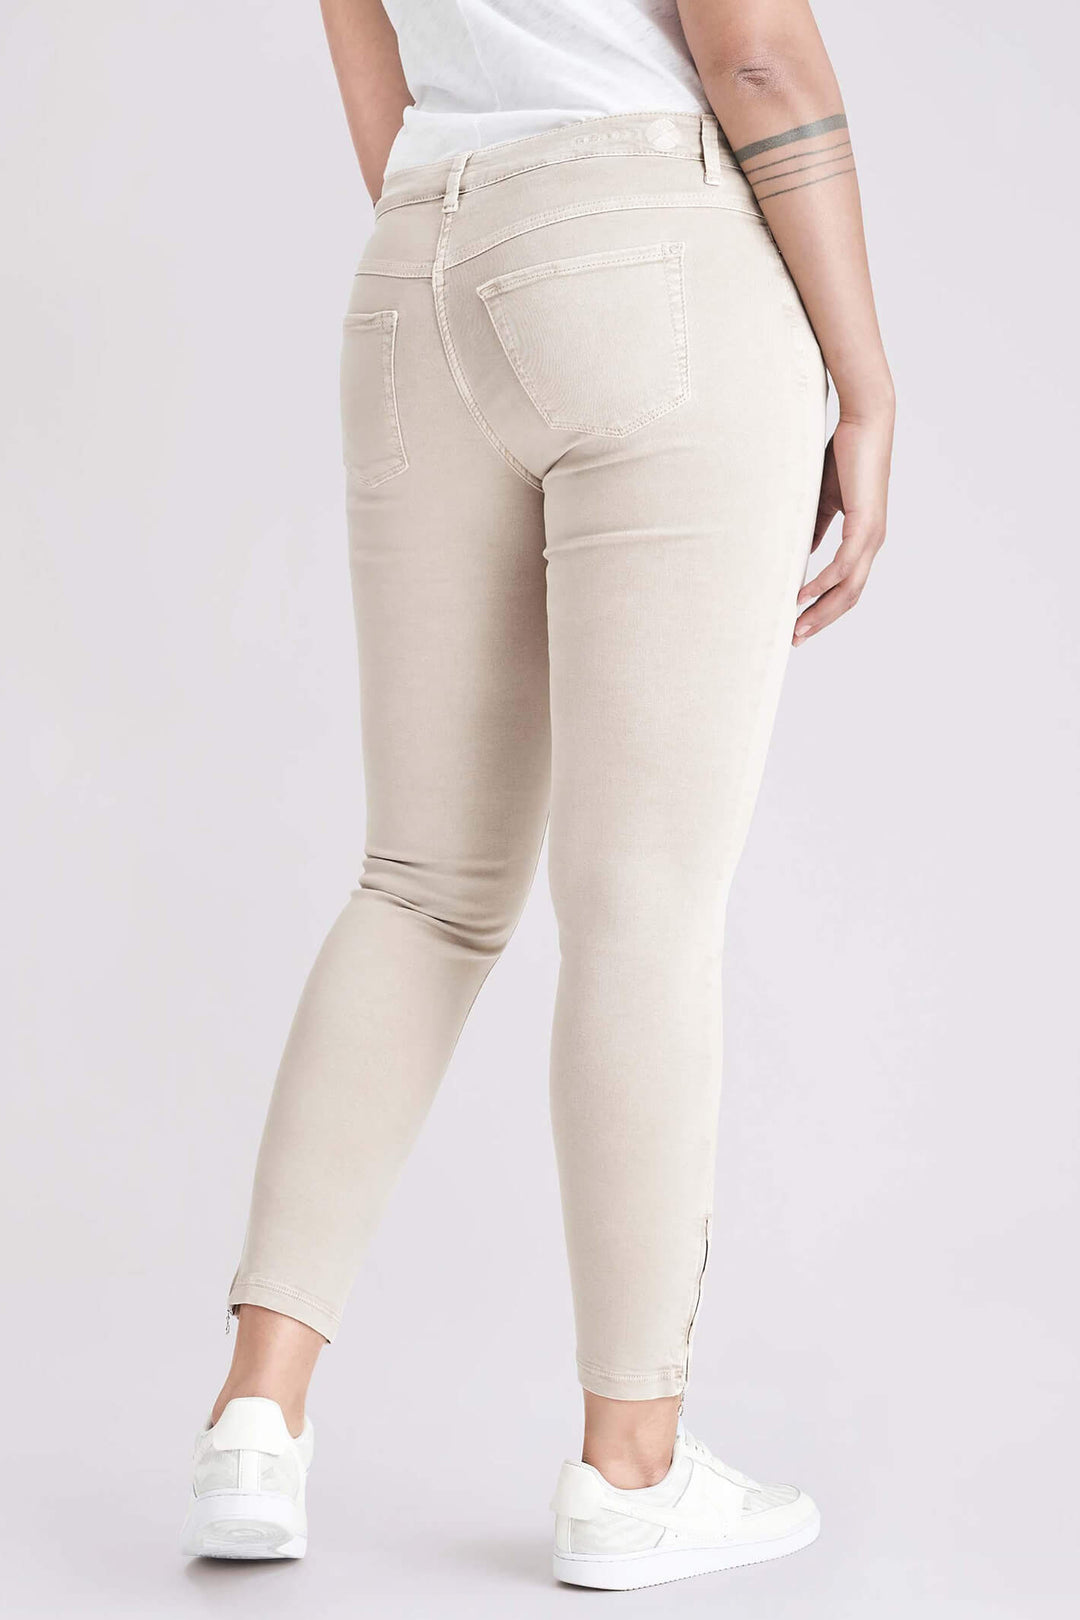 Mac 5471-00-0355L 214W Dream Chic Smoothly Beige Jeans - Shirley Allum Boutique